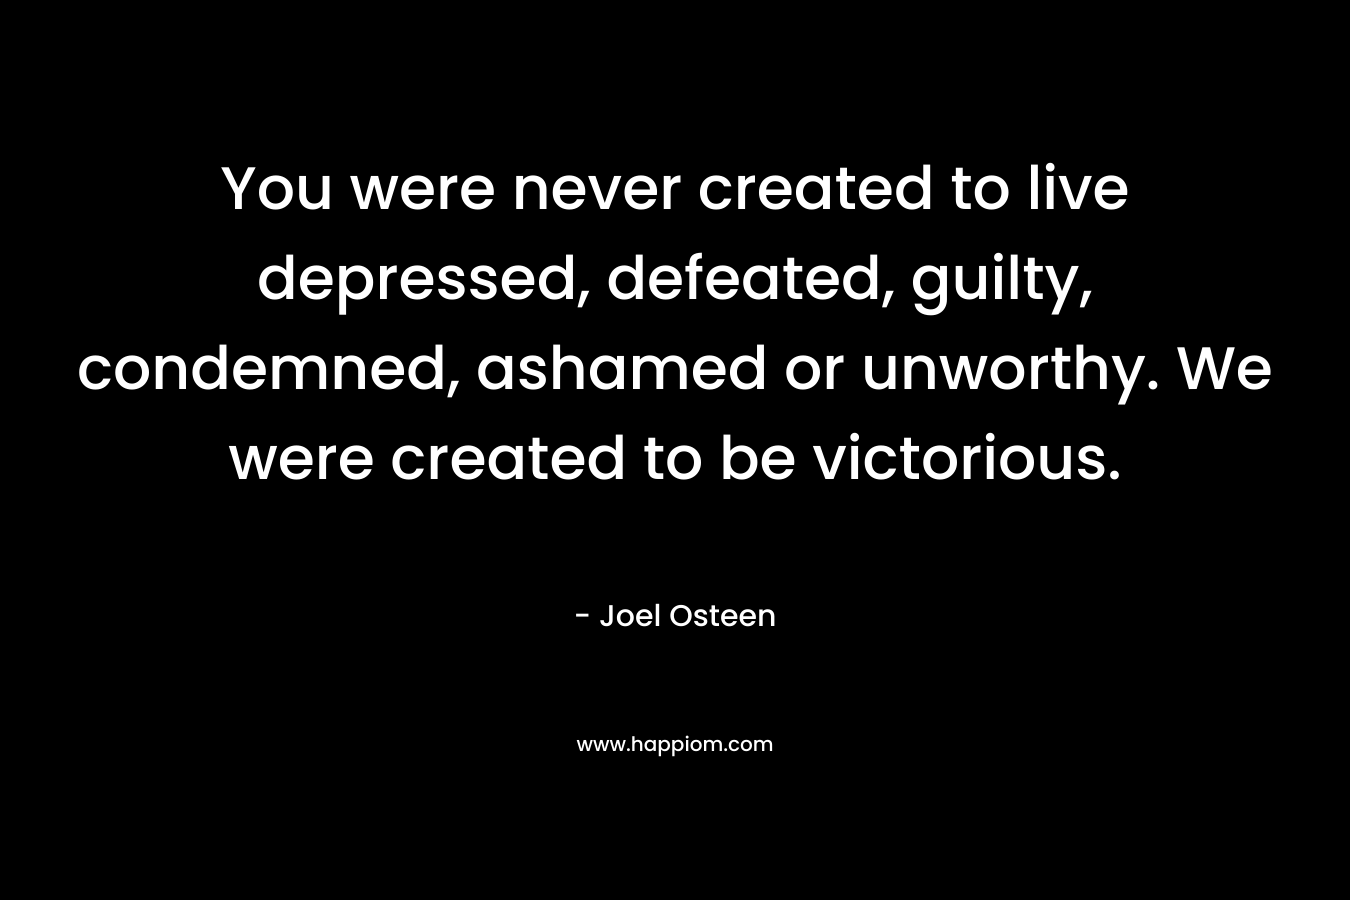 You were never created to live depressed, defeated, guilty, condemned, ashamed or unworthy. We were created to be victorious. – Joel Osteen